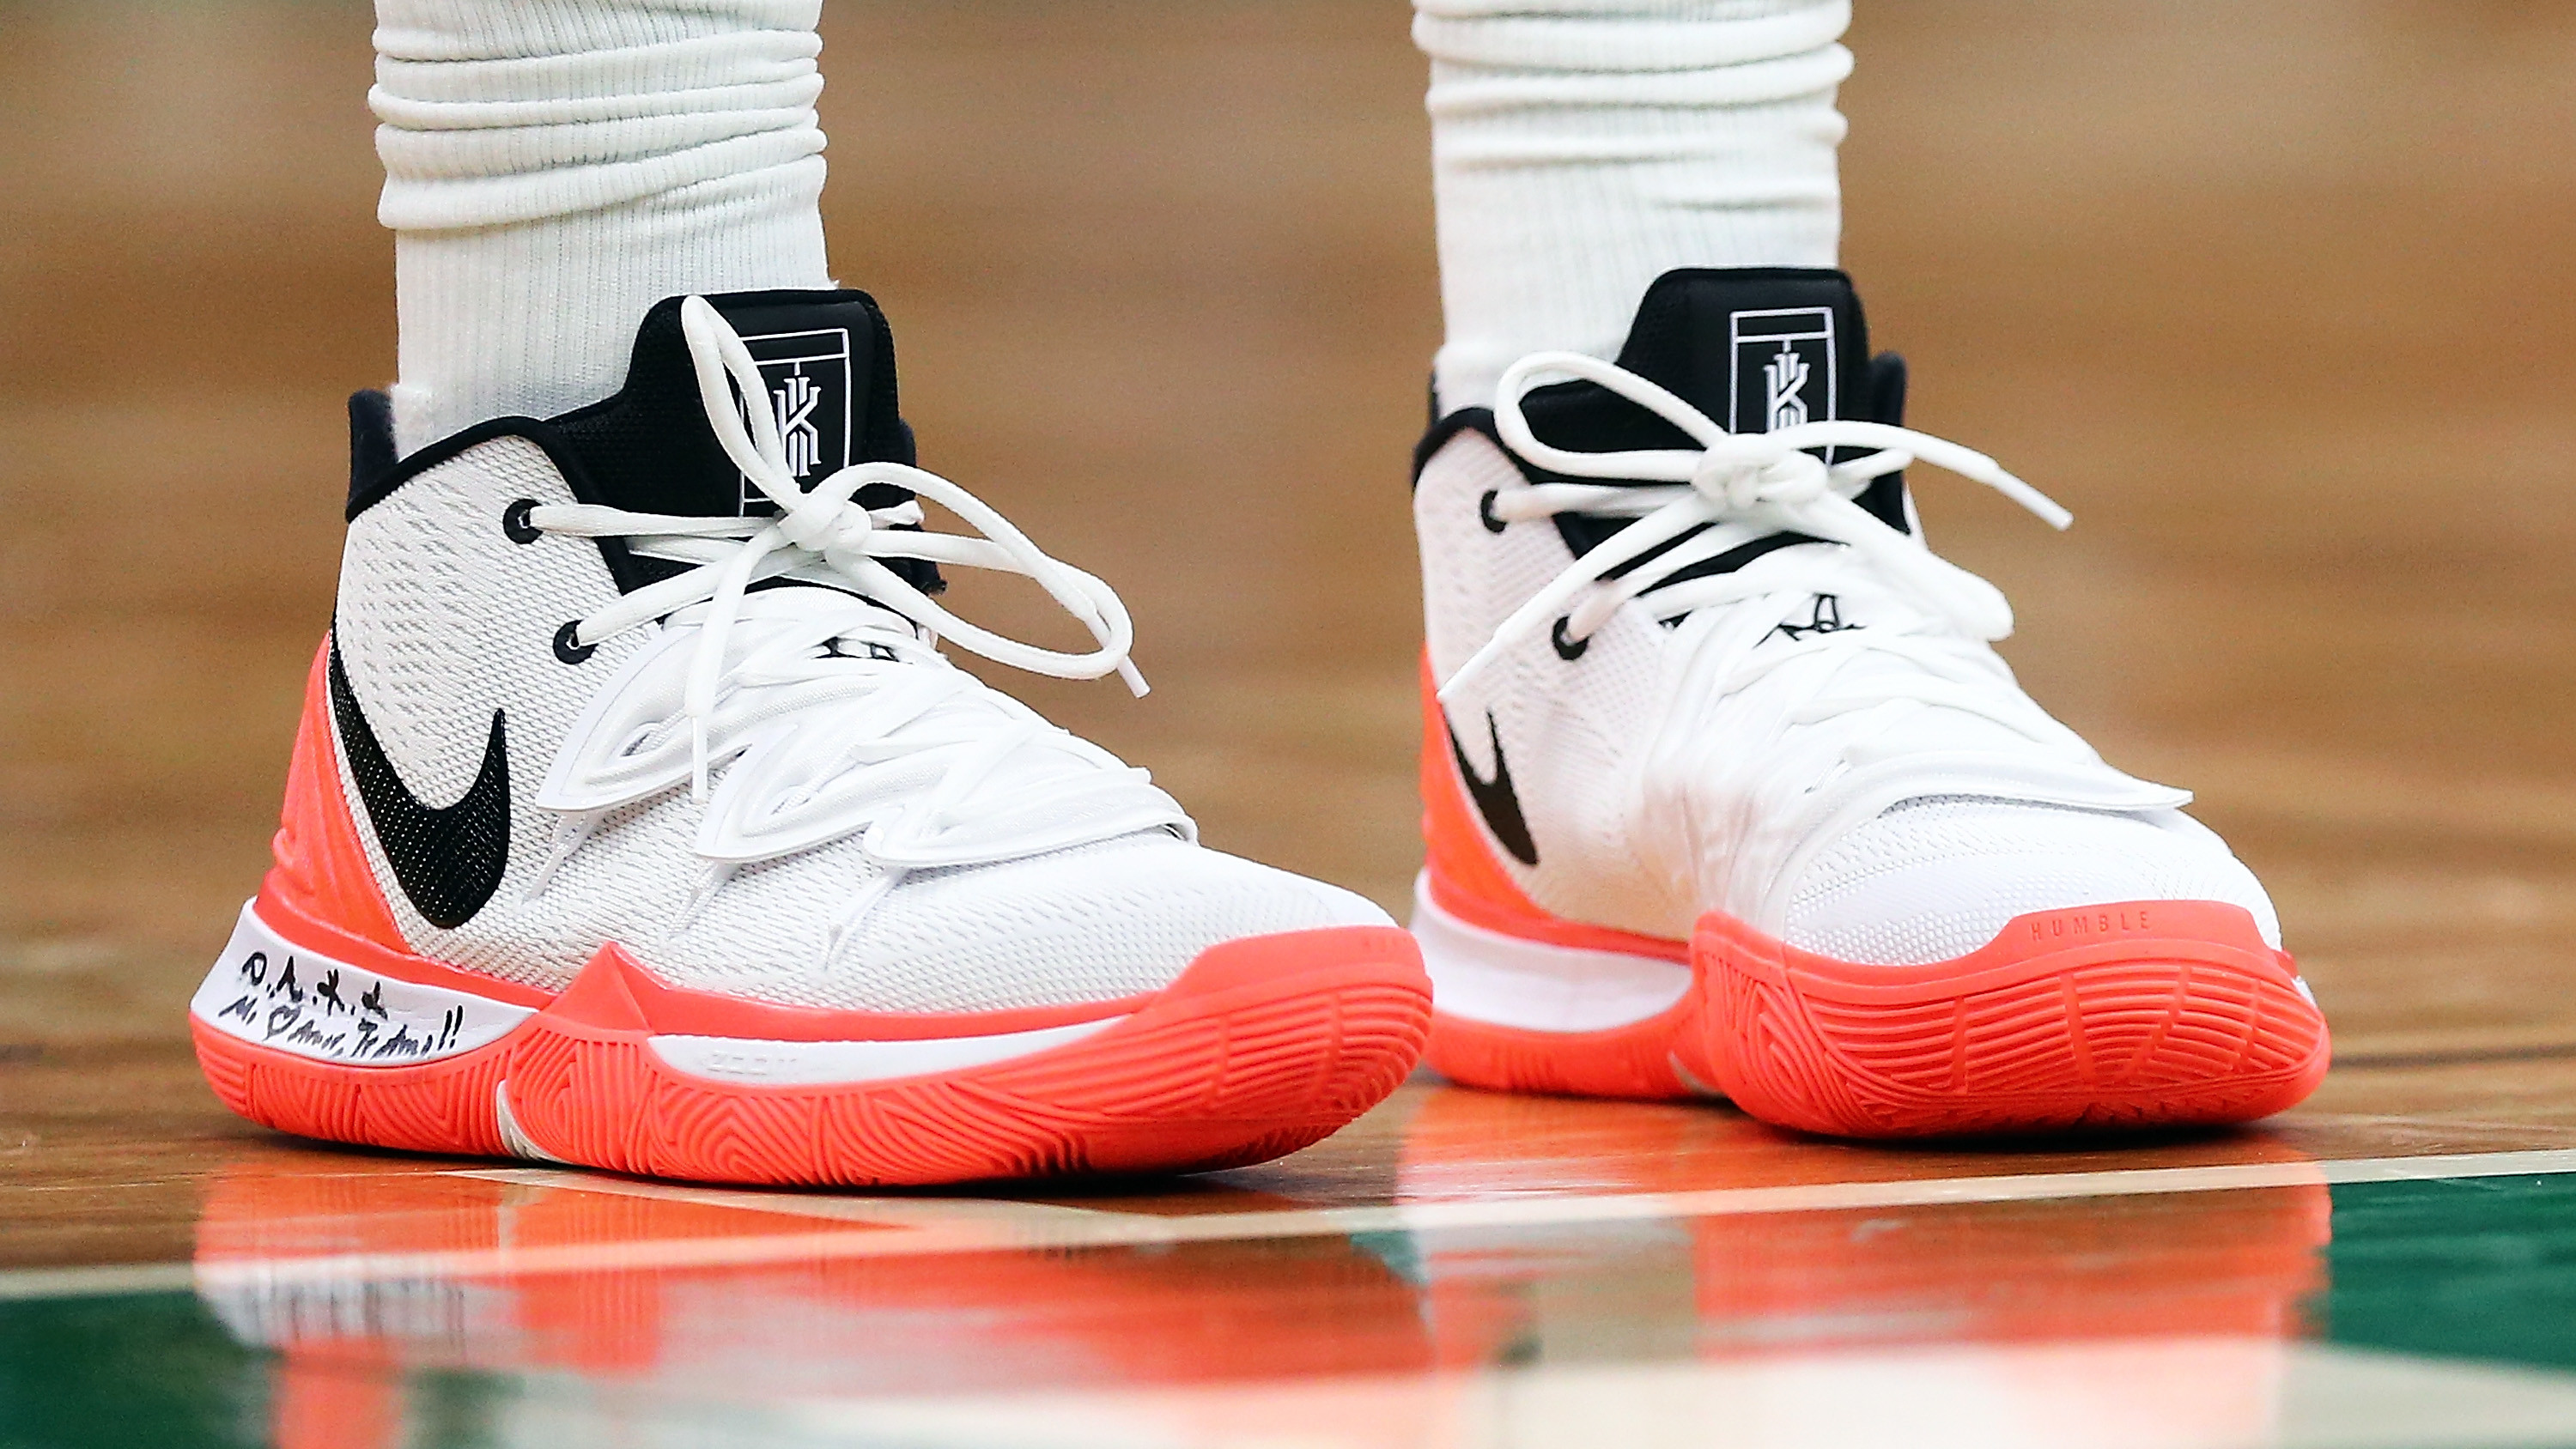 Debuts Tennis-Inspired Nike Kyrie PE | Sole Collector